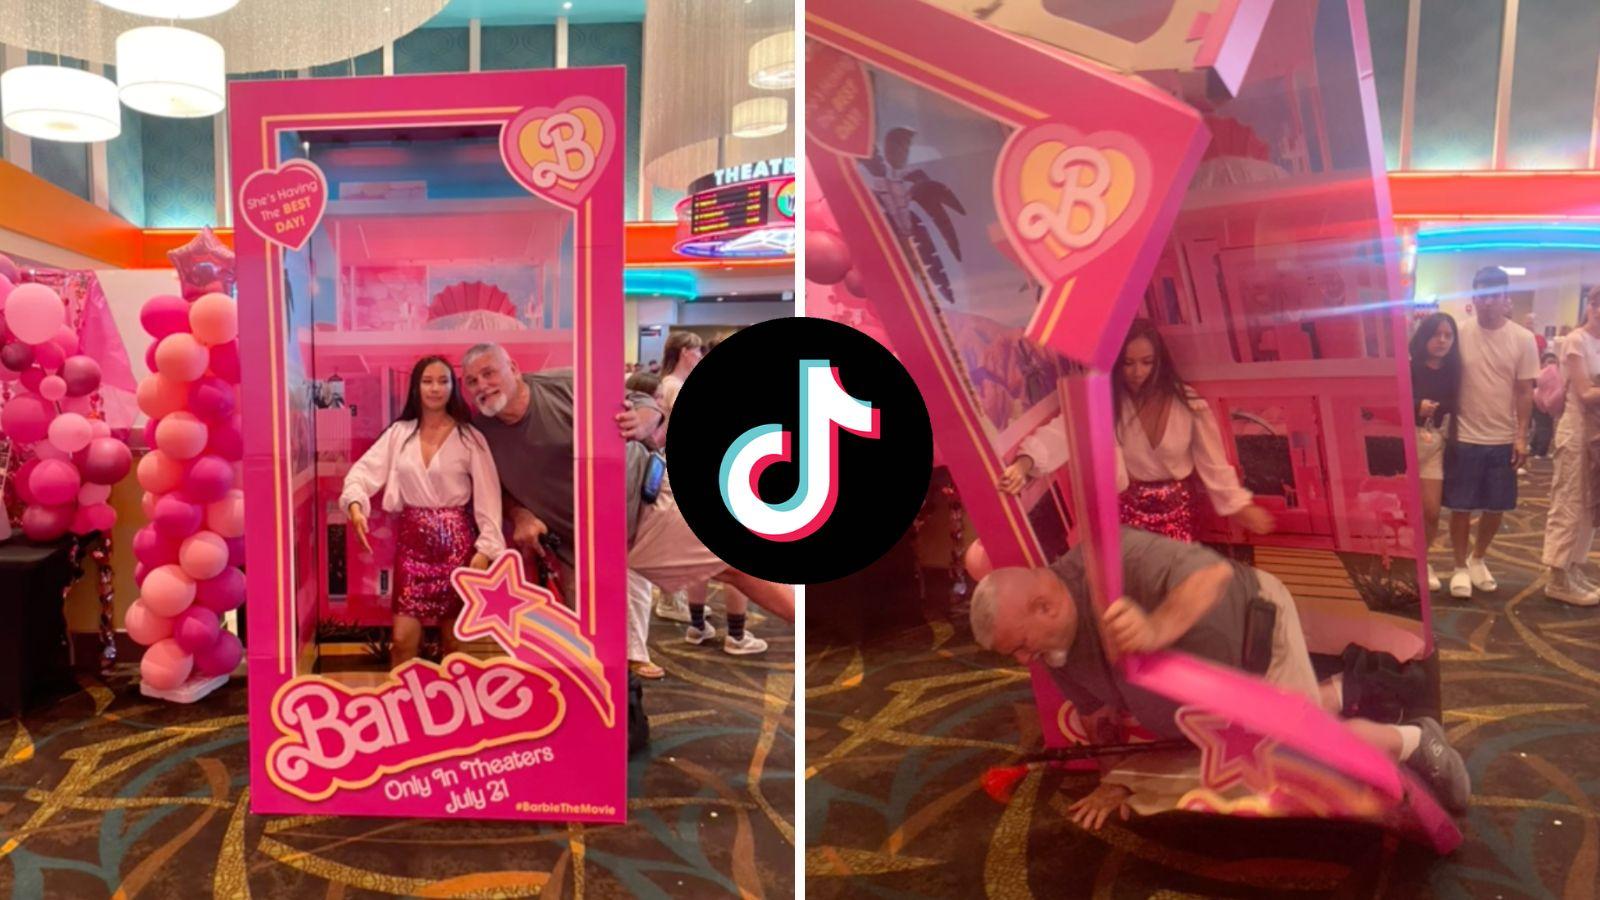 Man accidentally ruining Barbie photo op after photobombing woman